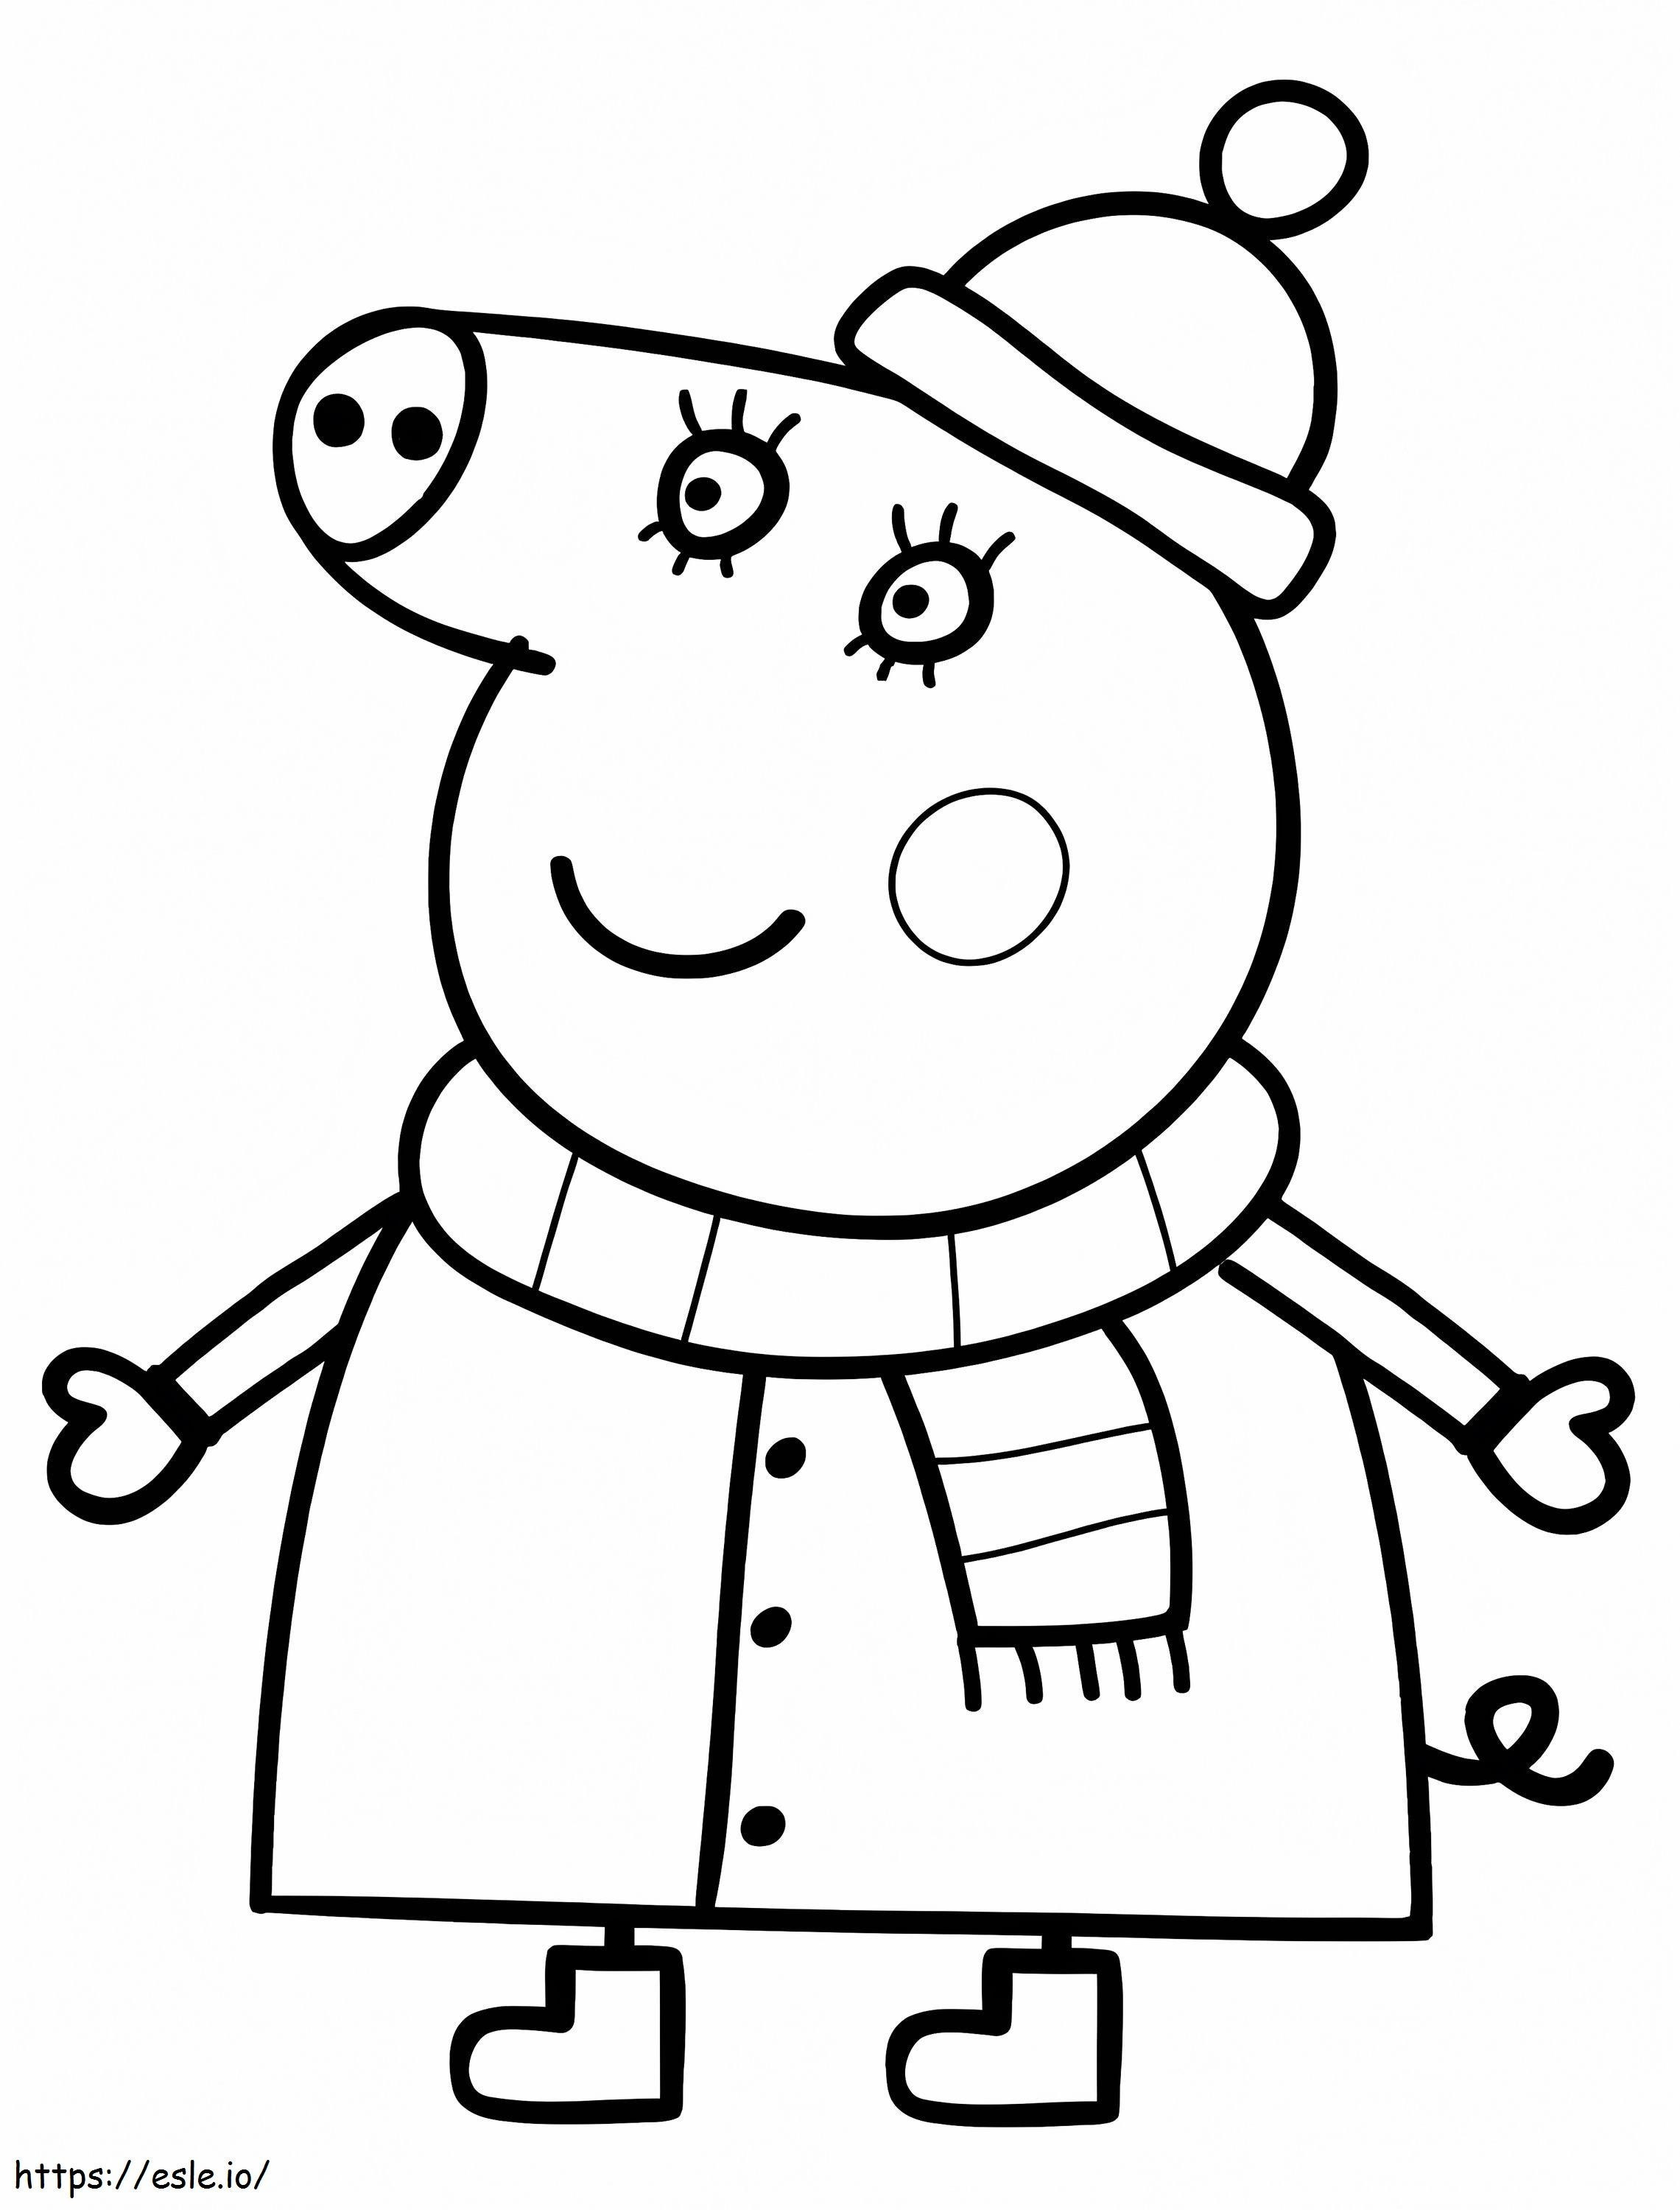 Mummy Pig In Winter Suit coloring page